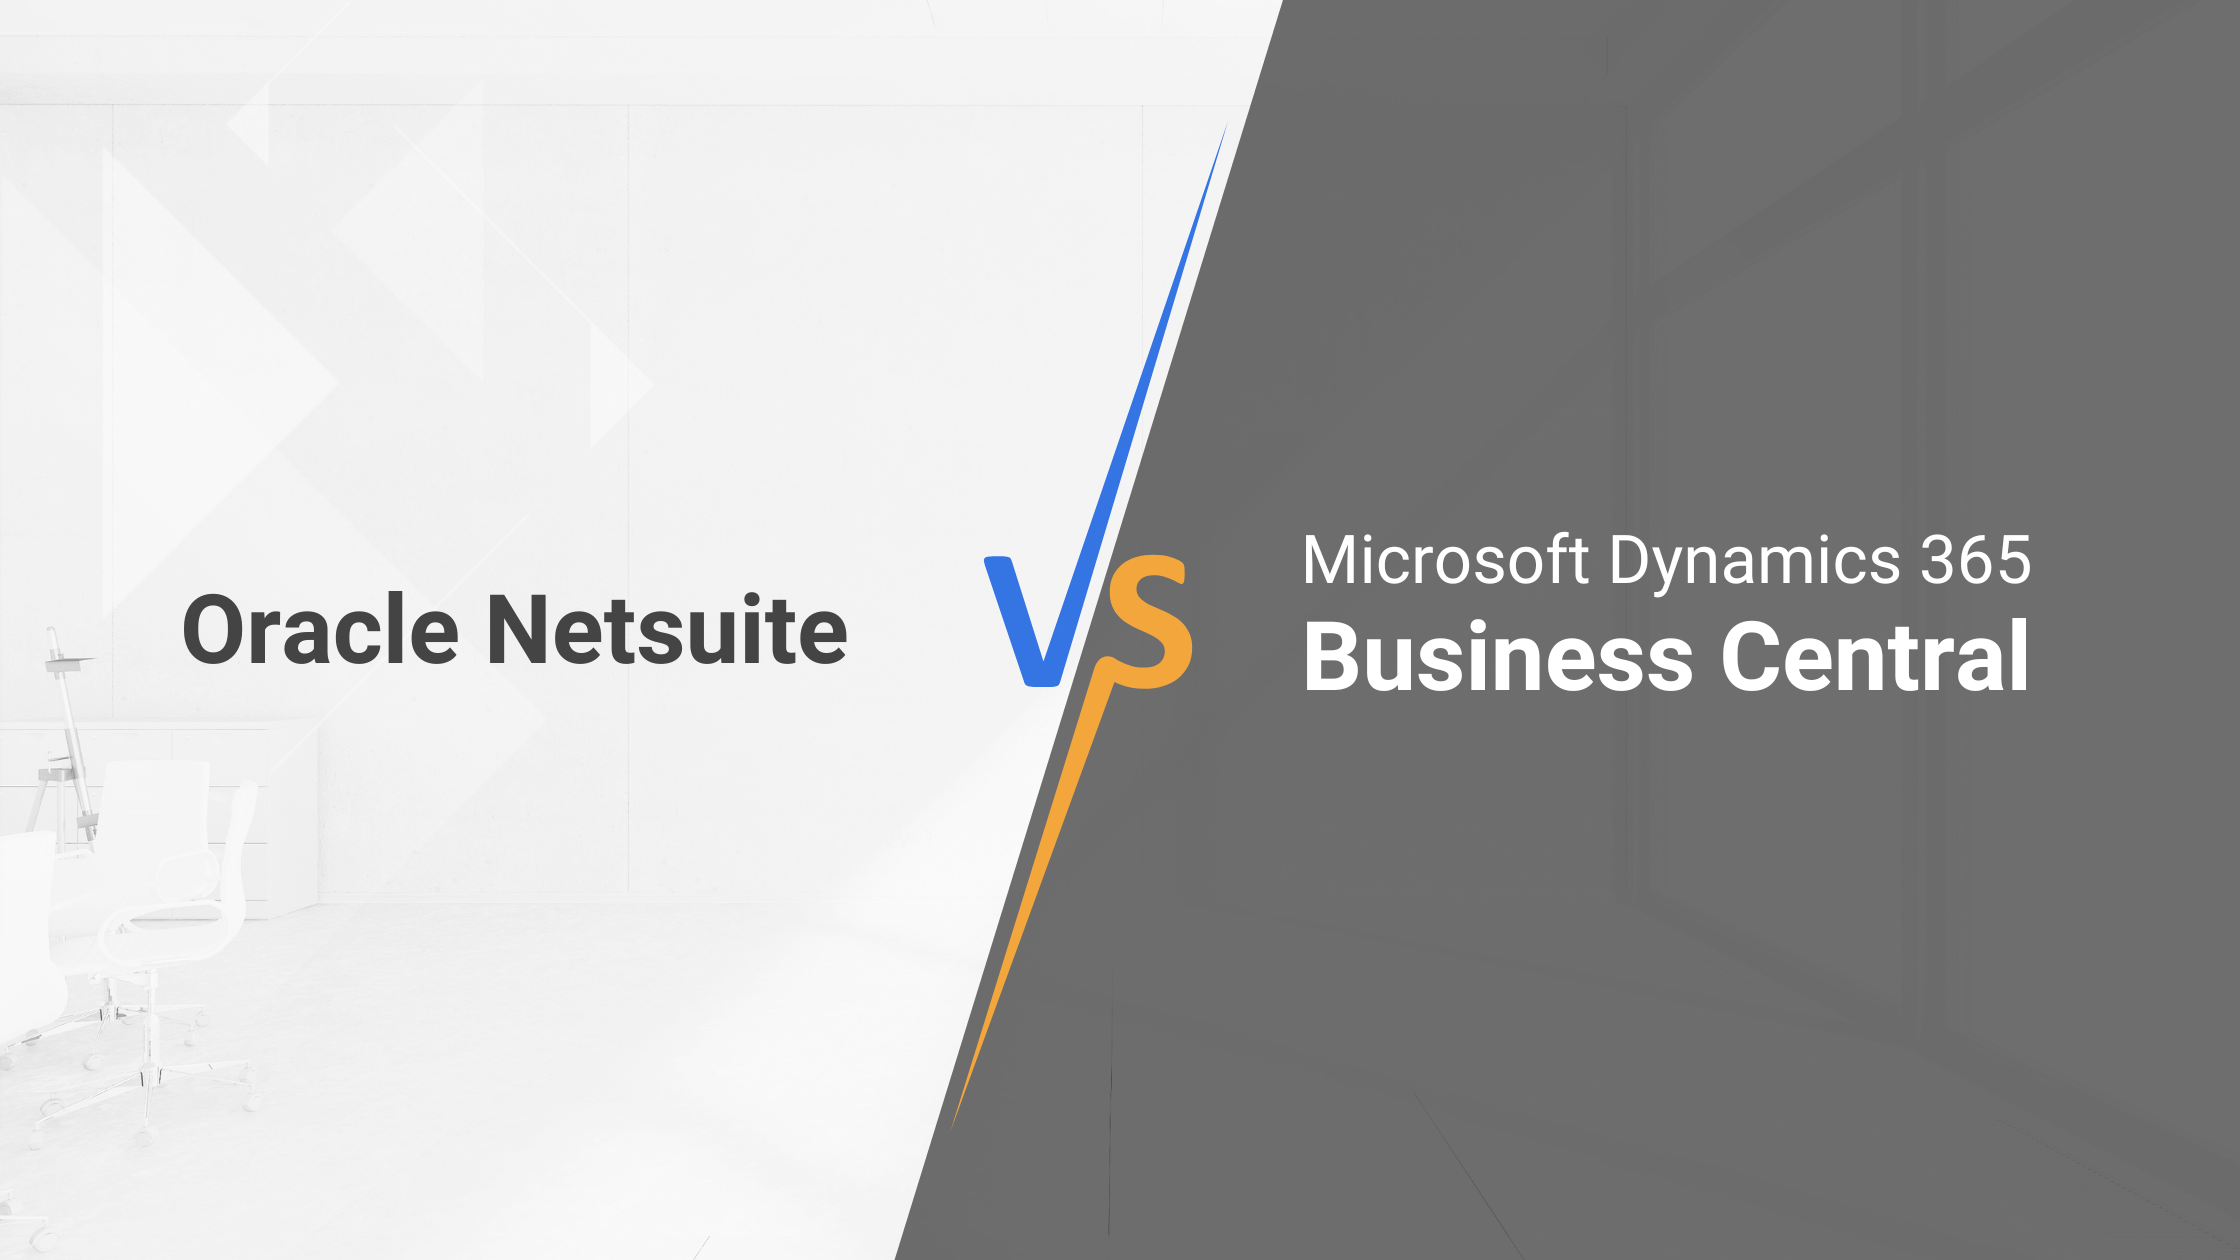 Making Your Decision: NetSuite or Business Central?